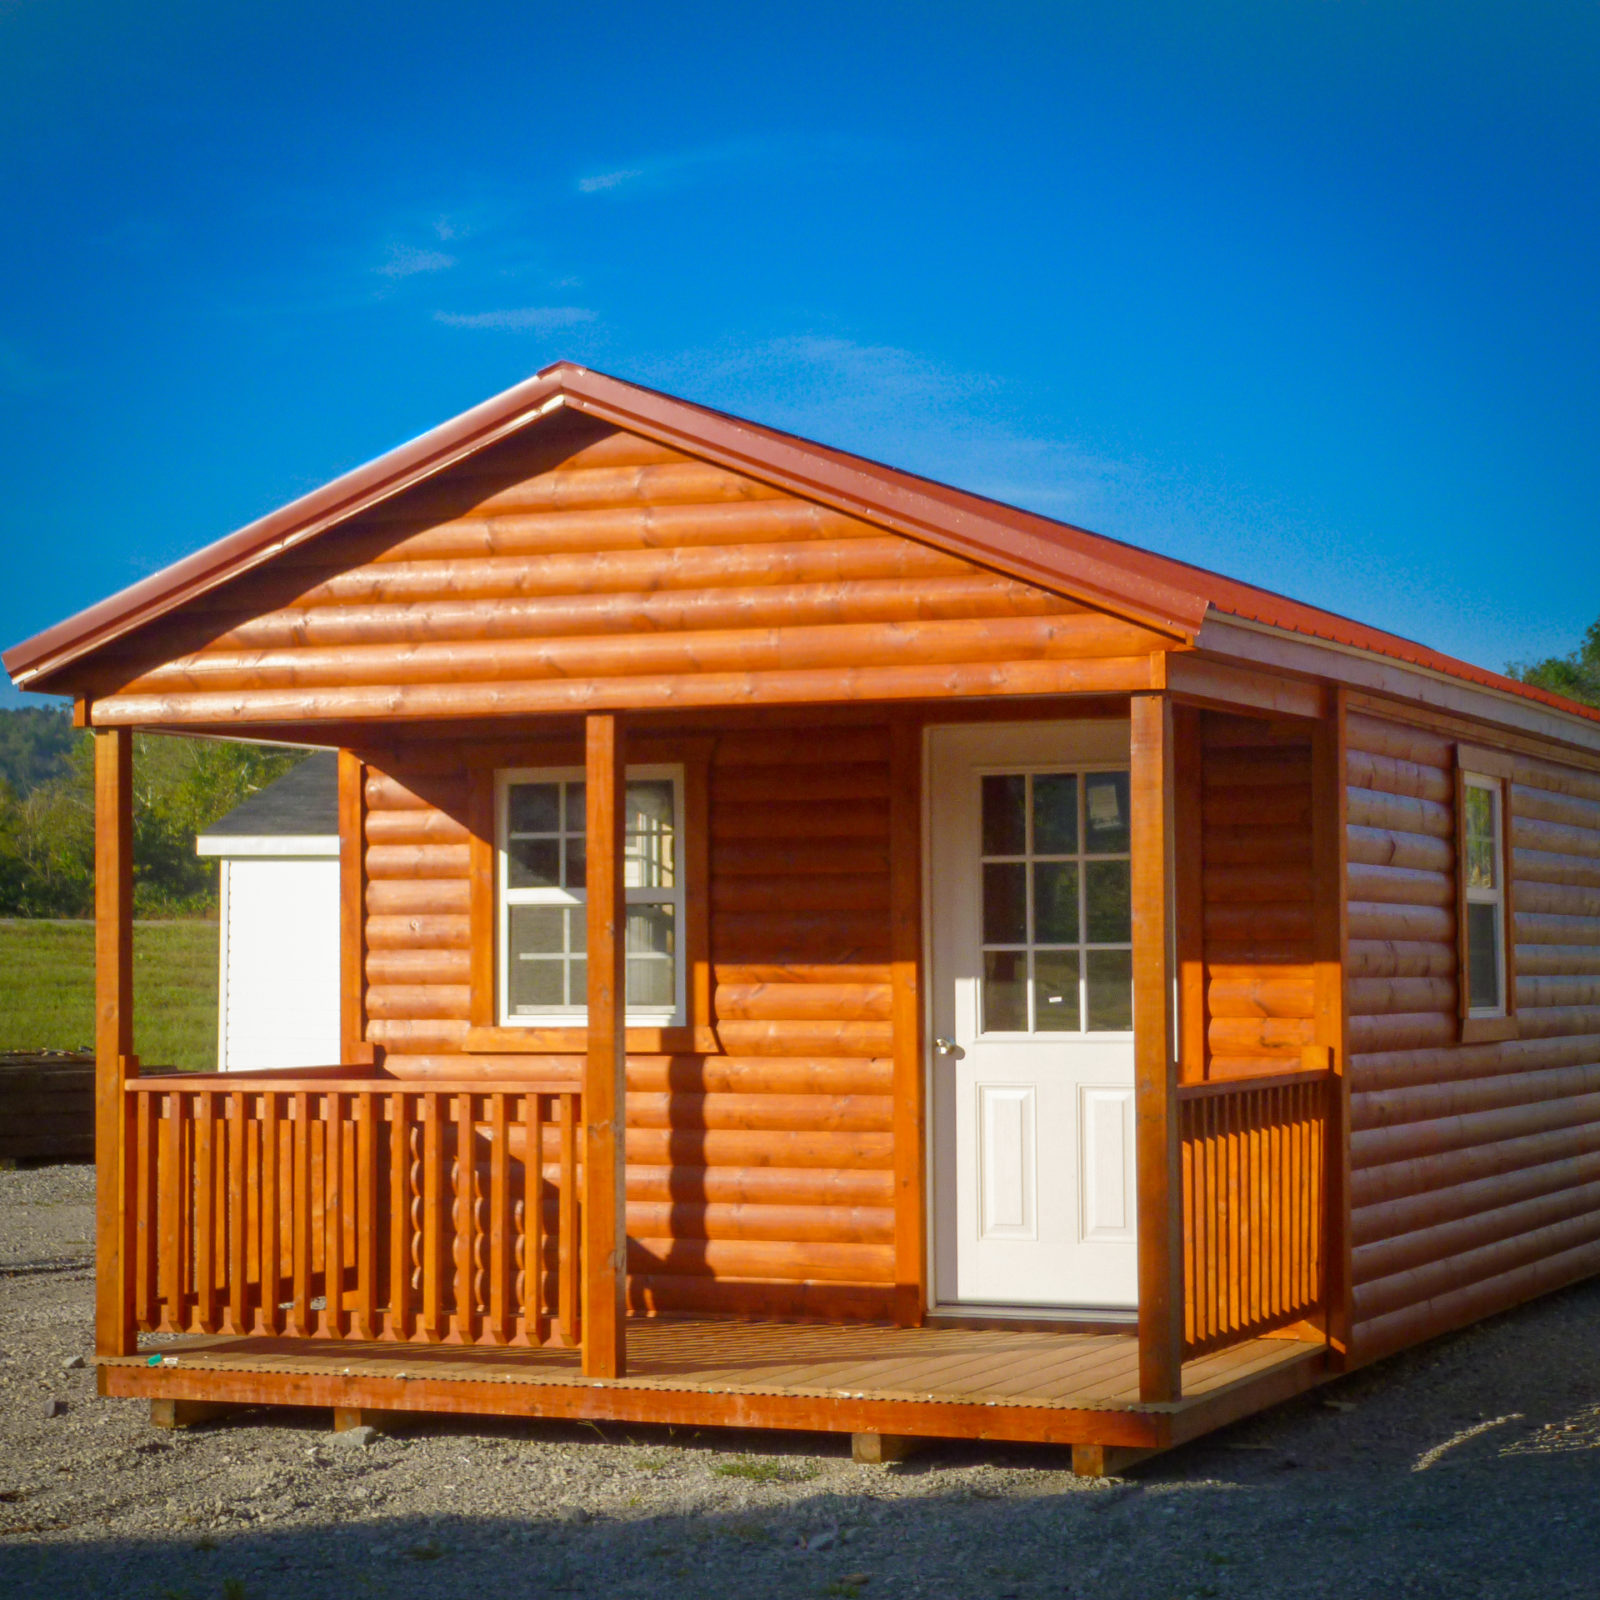 exterior white doored rent to own cabins for sale